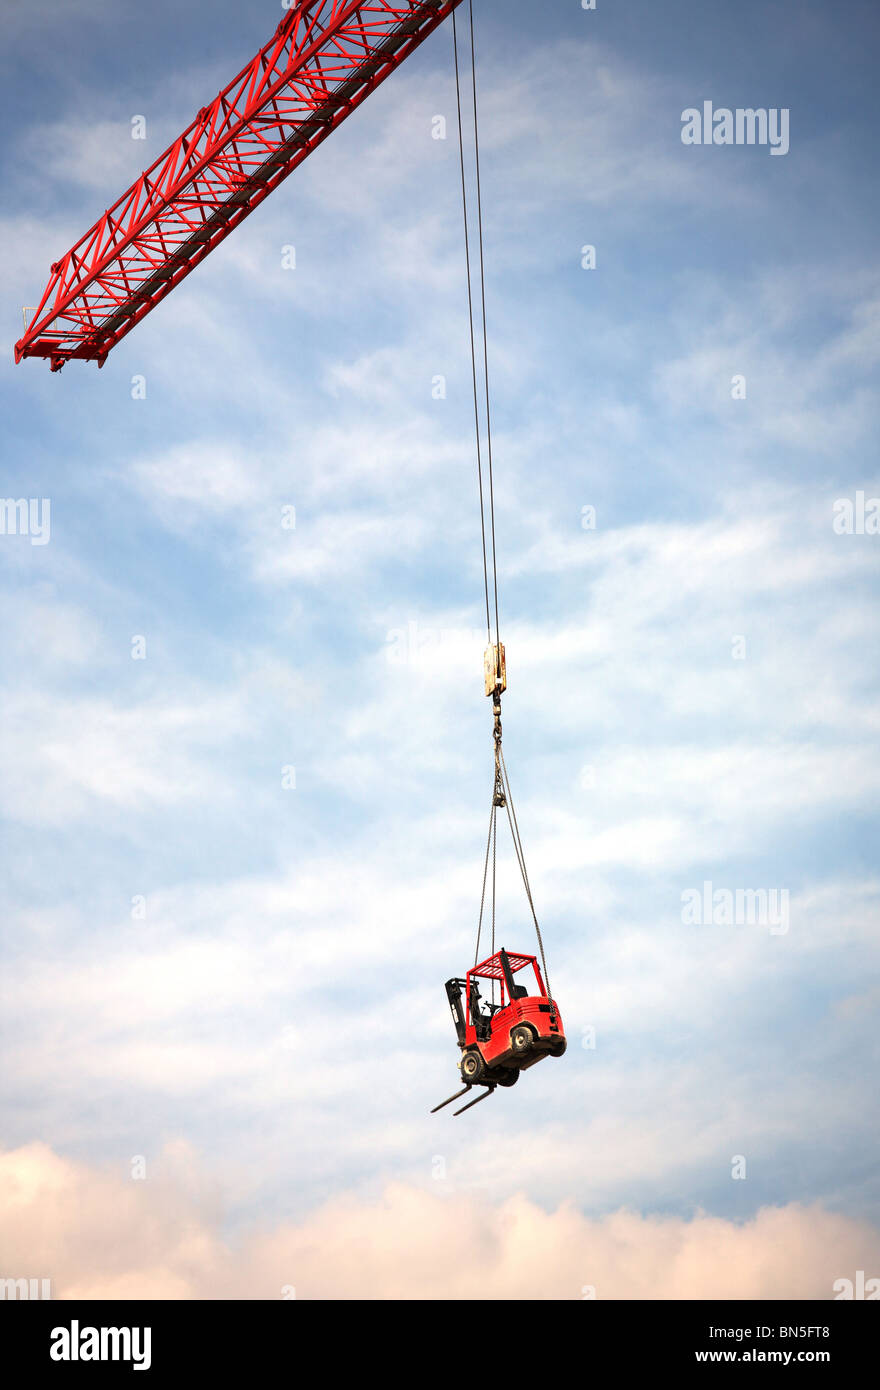 A forklift transported by a crane, Bremerhaven, Germany Stock Photo